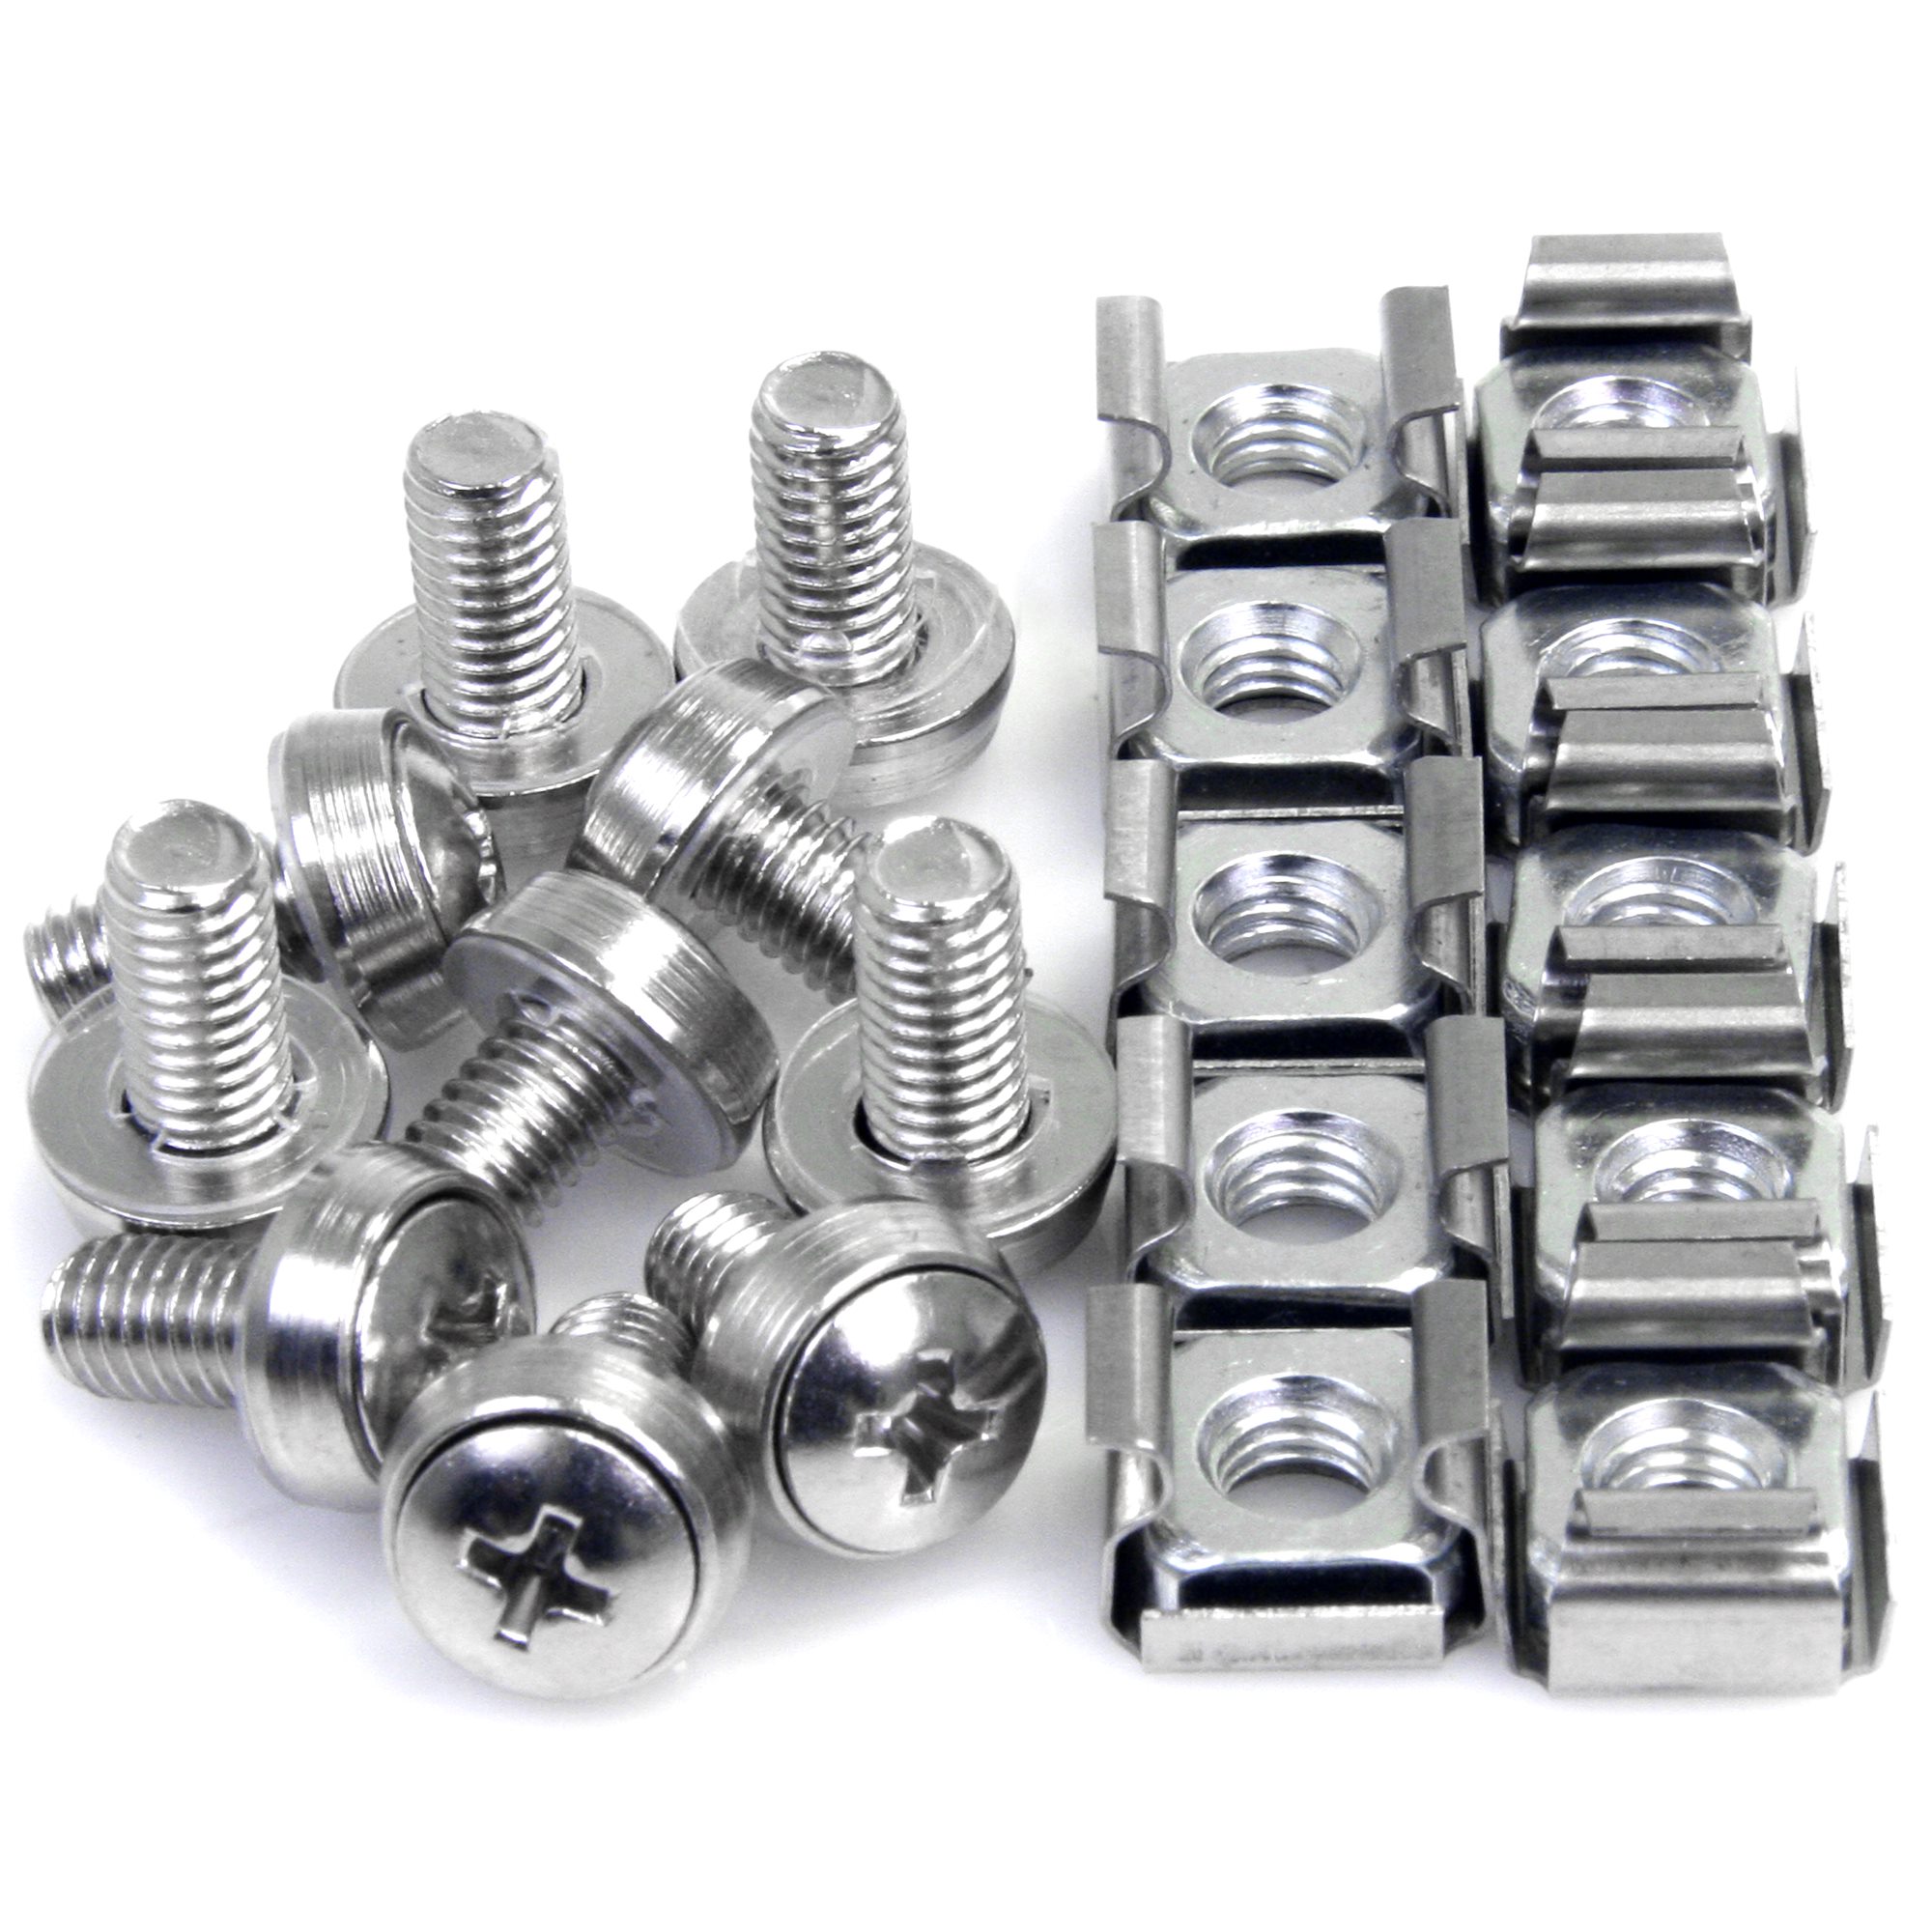 StarTech.com 50 Pkg M6 Mounting Screws and Cage Nuts for Server Rack Cabinet Scr 